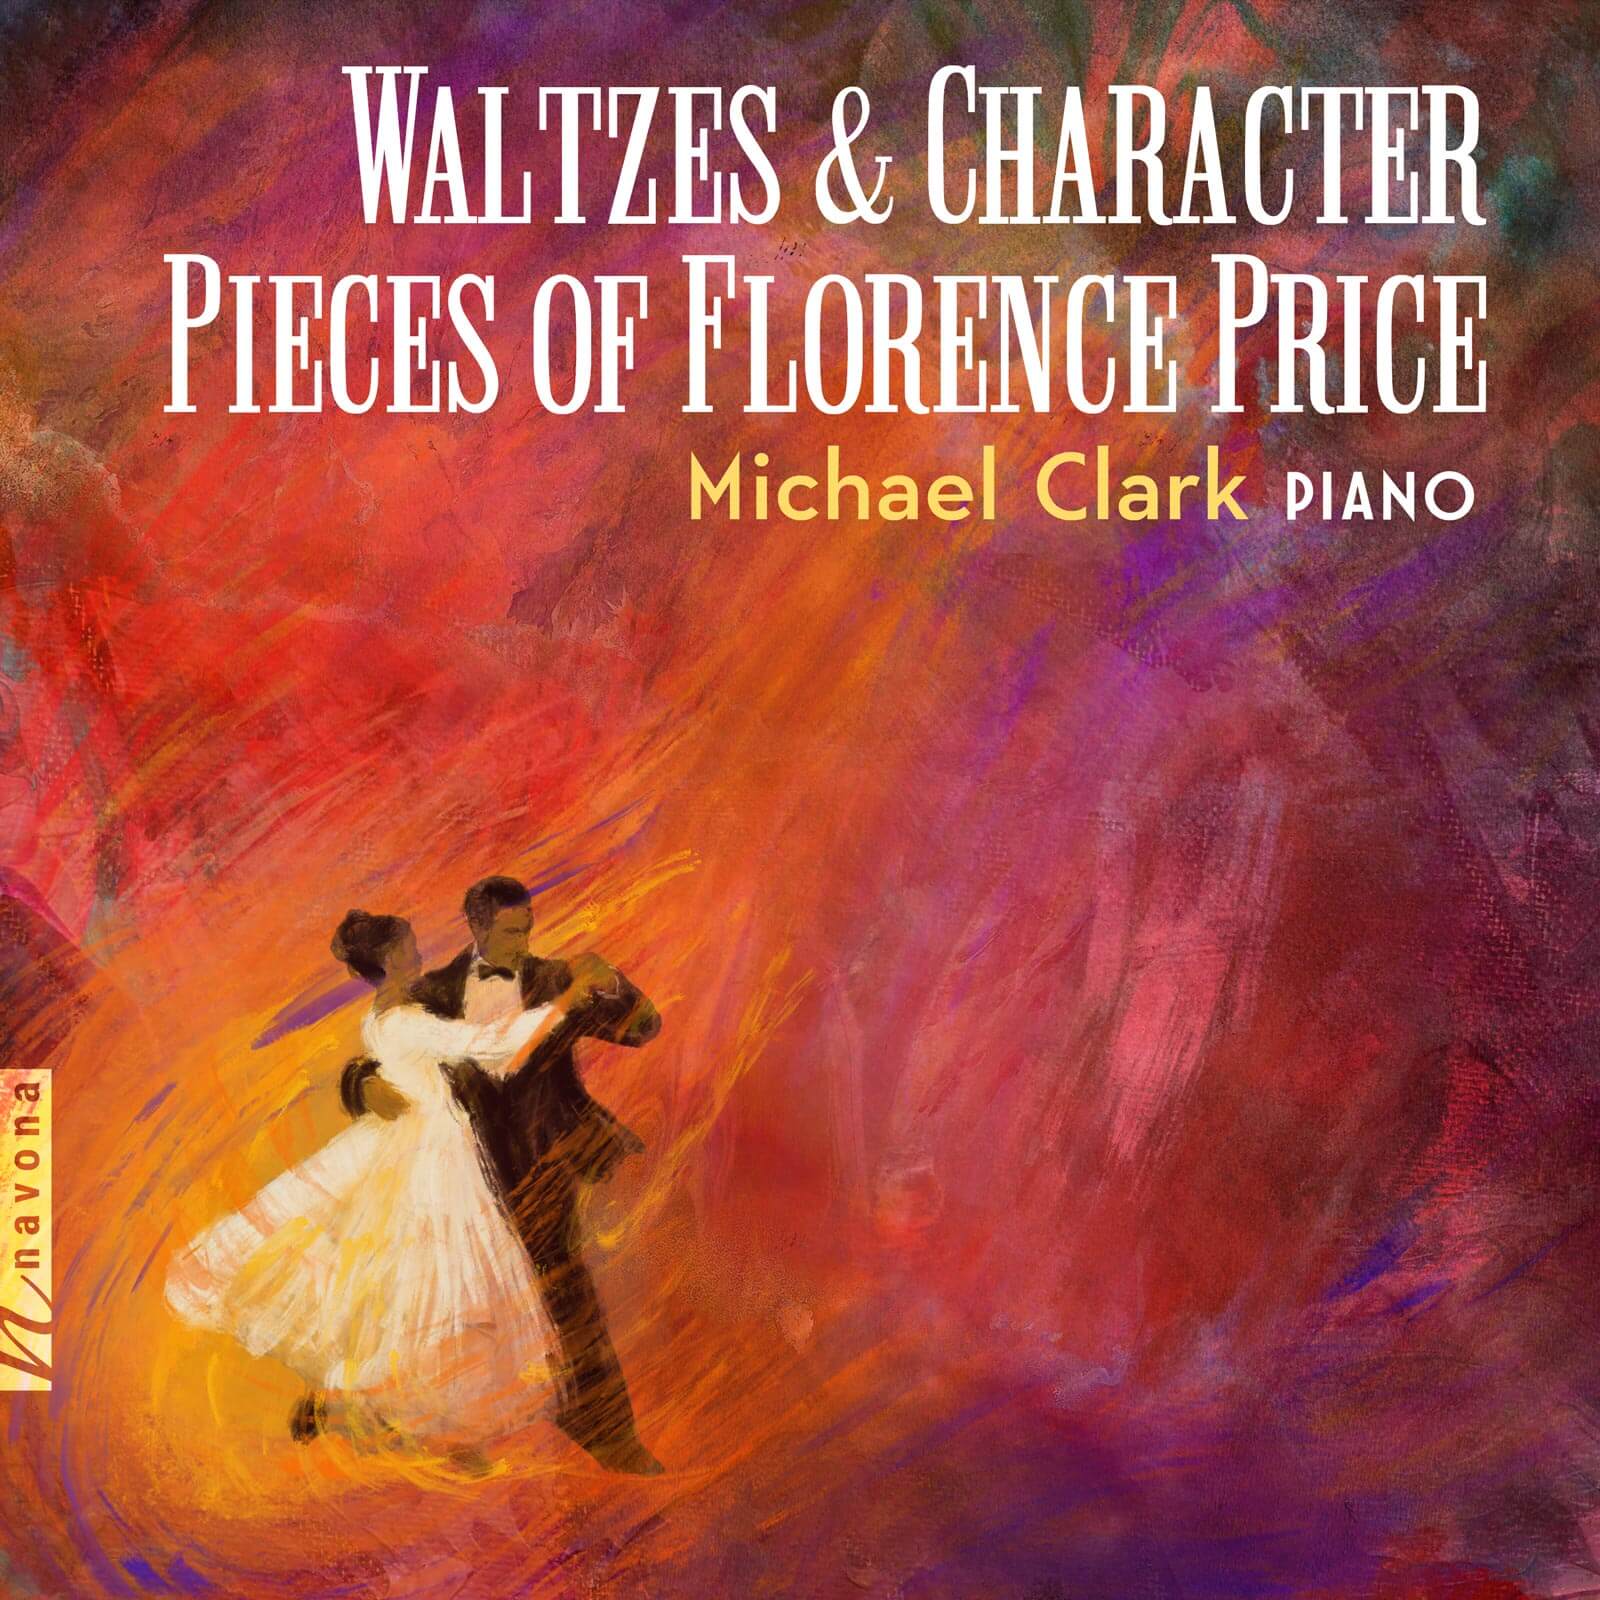 album cover for Waltzes & Character Pieces of Florence Price by Michael Clark on Piano depicting a colorful painting a formally dressed man and woman dancing